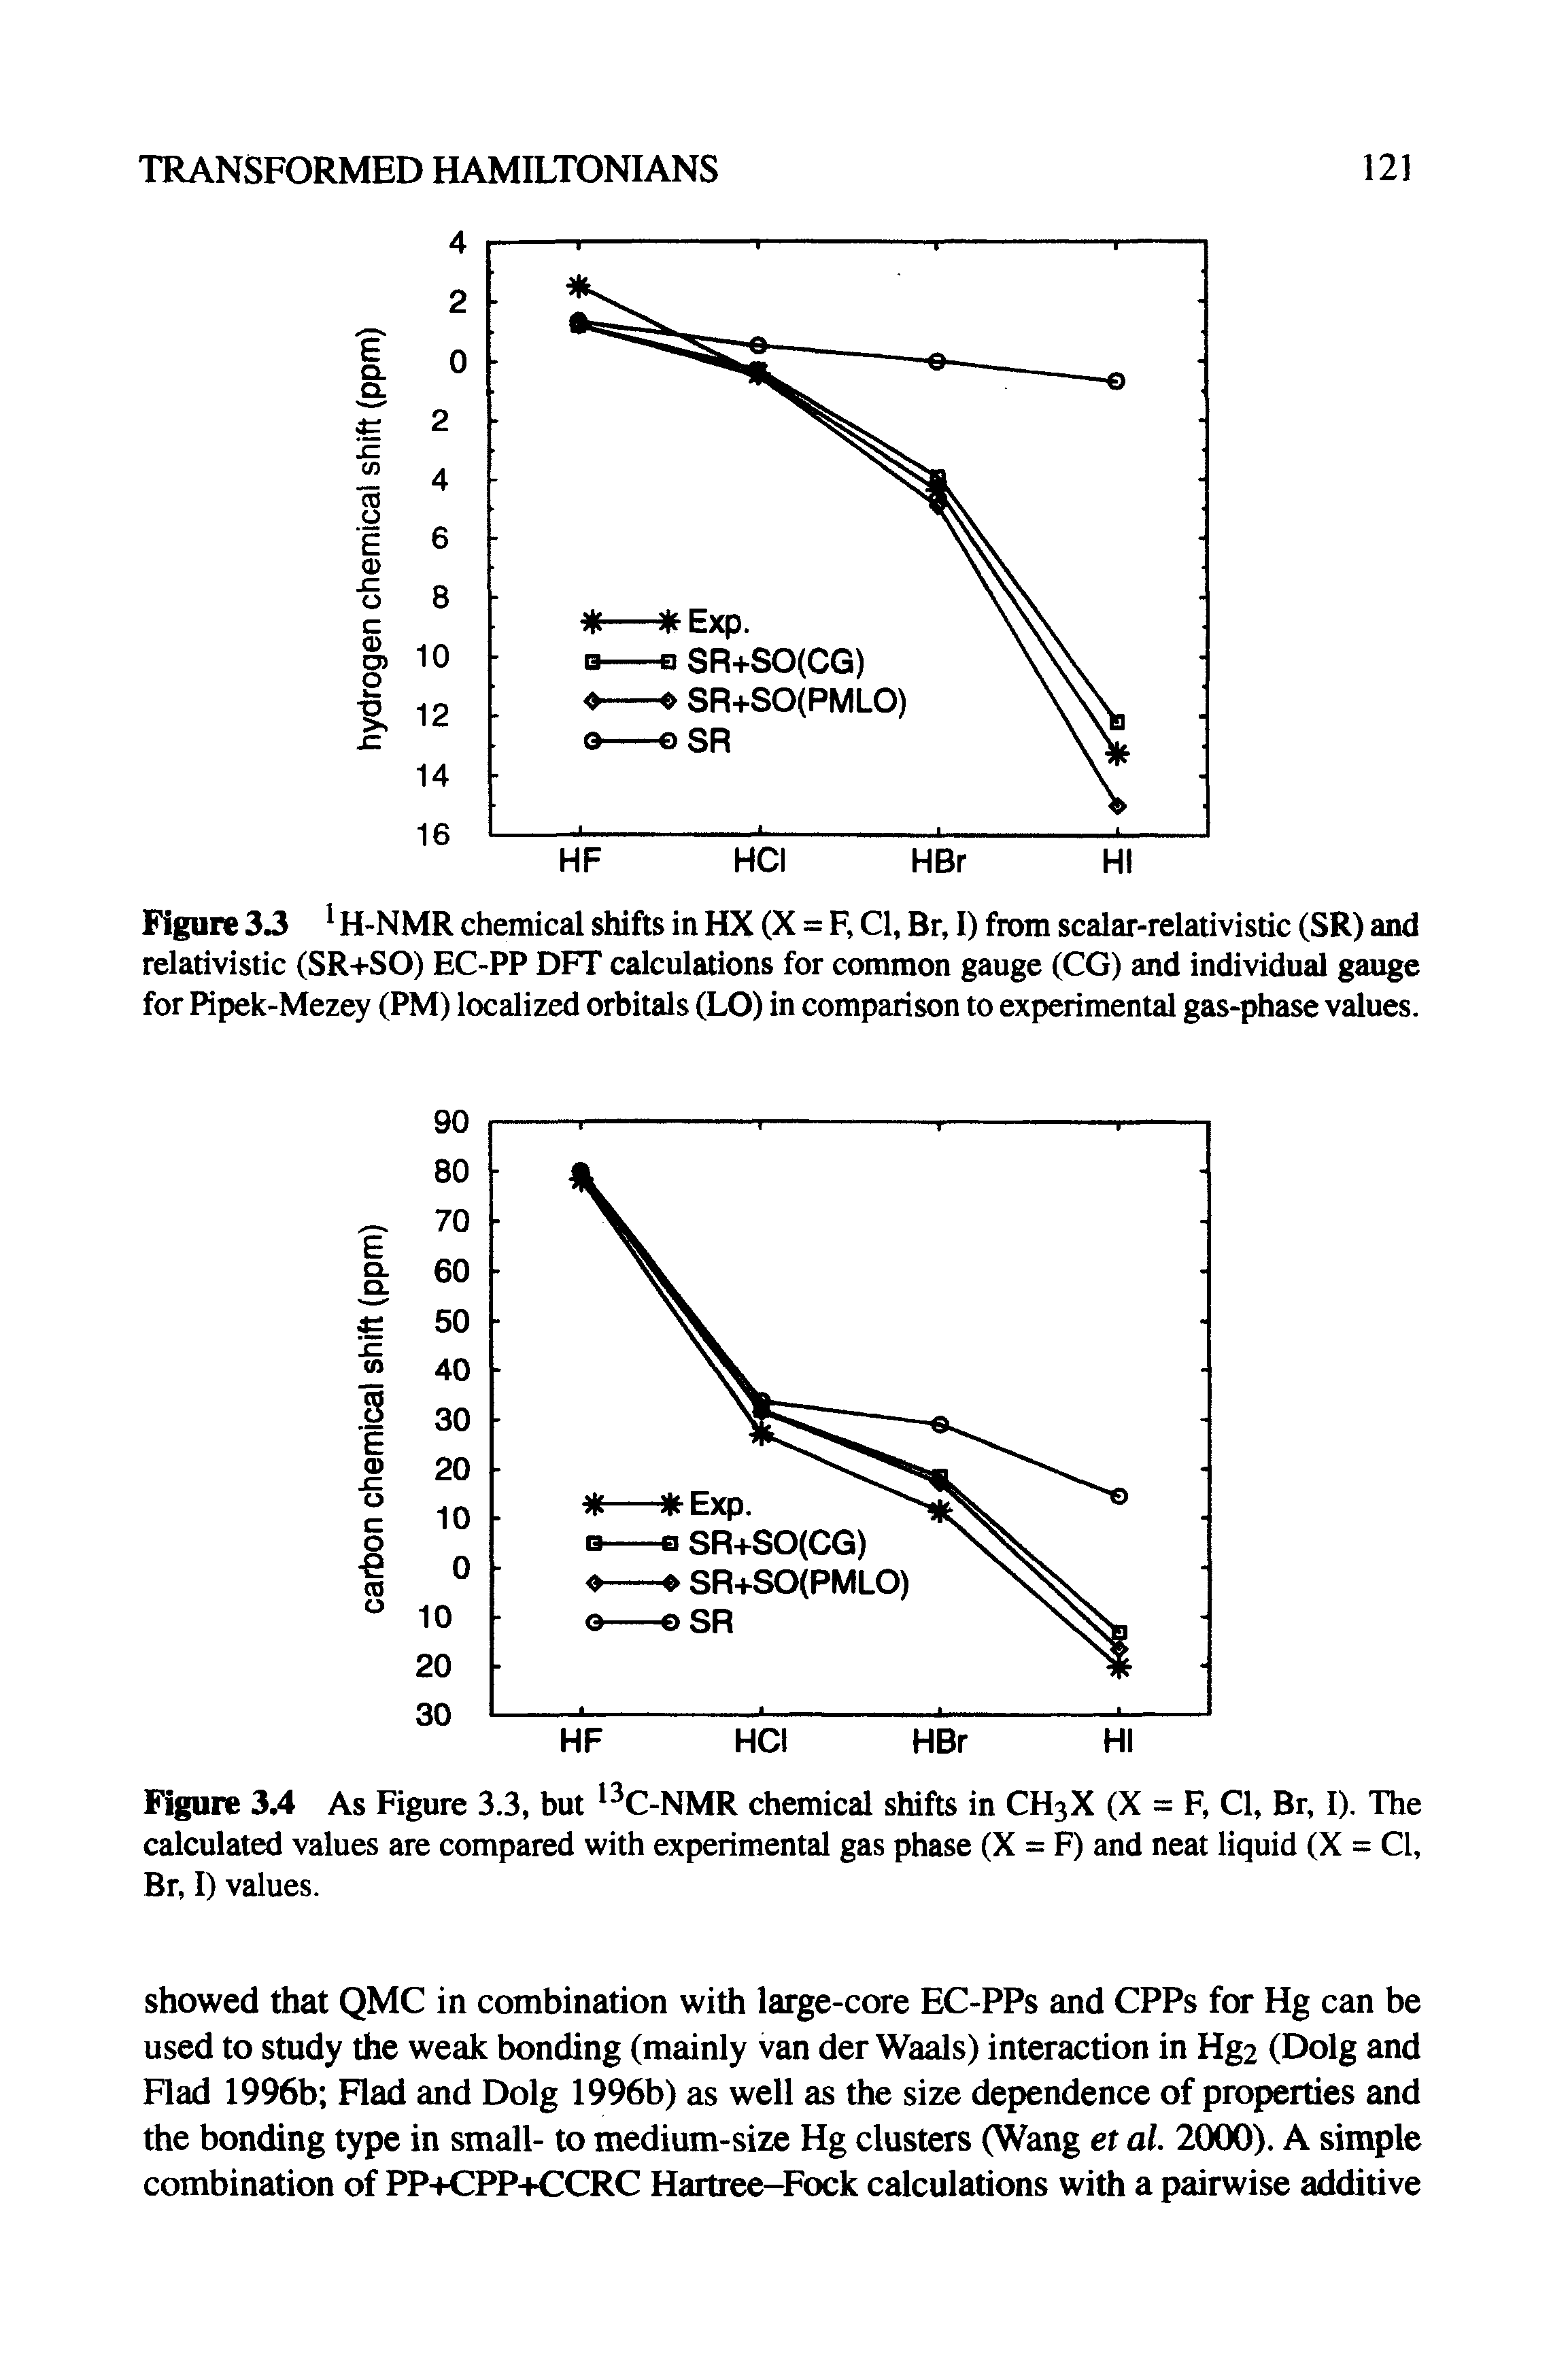 Figure 33 1H-NMR chemical shifts in HX (X = F, Cl, Br, I) from scalar-relativistic (SR) and relativistic (SR+SO) EC-PP DFT calculations for common gauge (CG) and individual gauge for Pipek-Mezey (PM) localized orbitals (LO) in comparison to experimental gas-phase values.